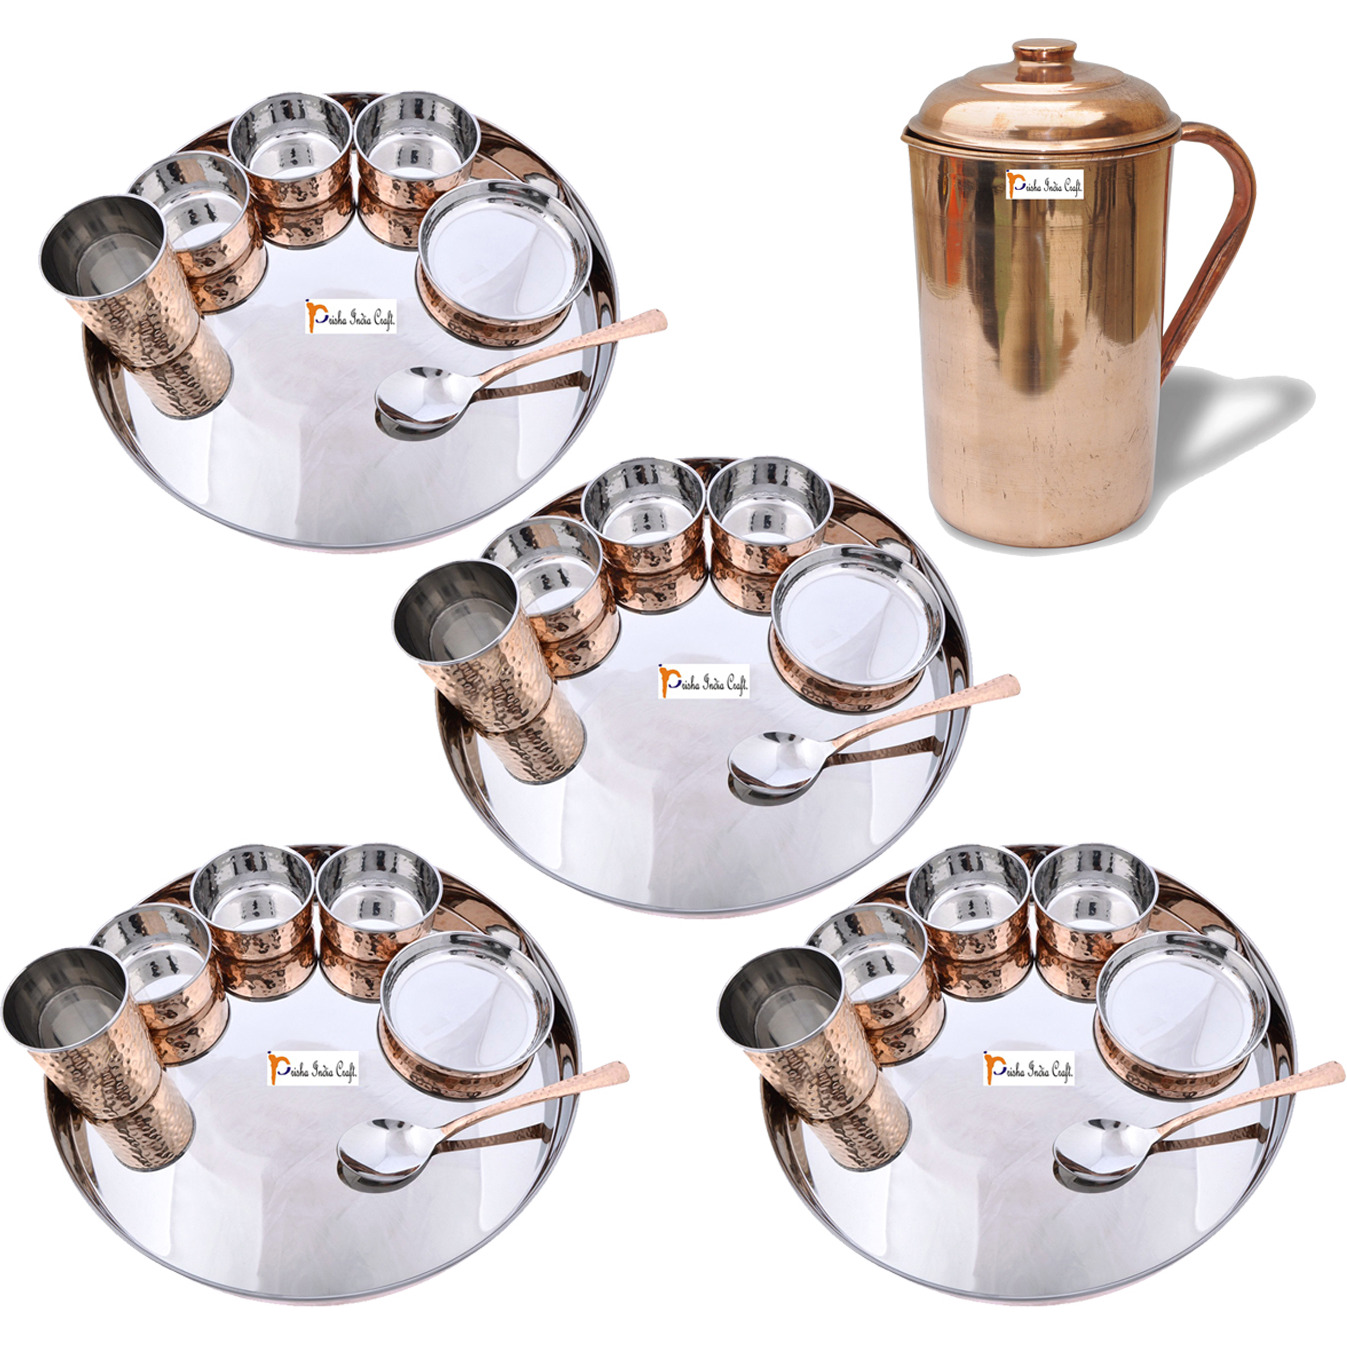 Prisha India Craft B. Set of 4 Dinnerware Traditional Stainless Steel Copper Dinner Set of Thali Plate, Bowls, Glass and Spoon, Dia 13  With 1 Pure Copper Pitcher Jug - Christmas Gift